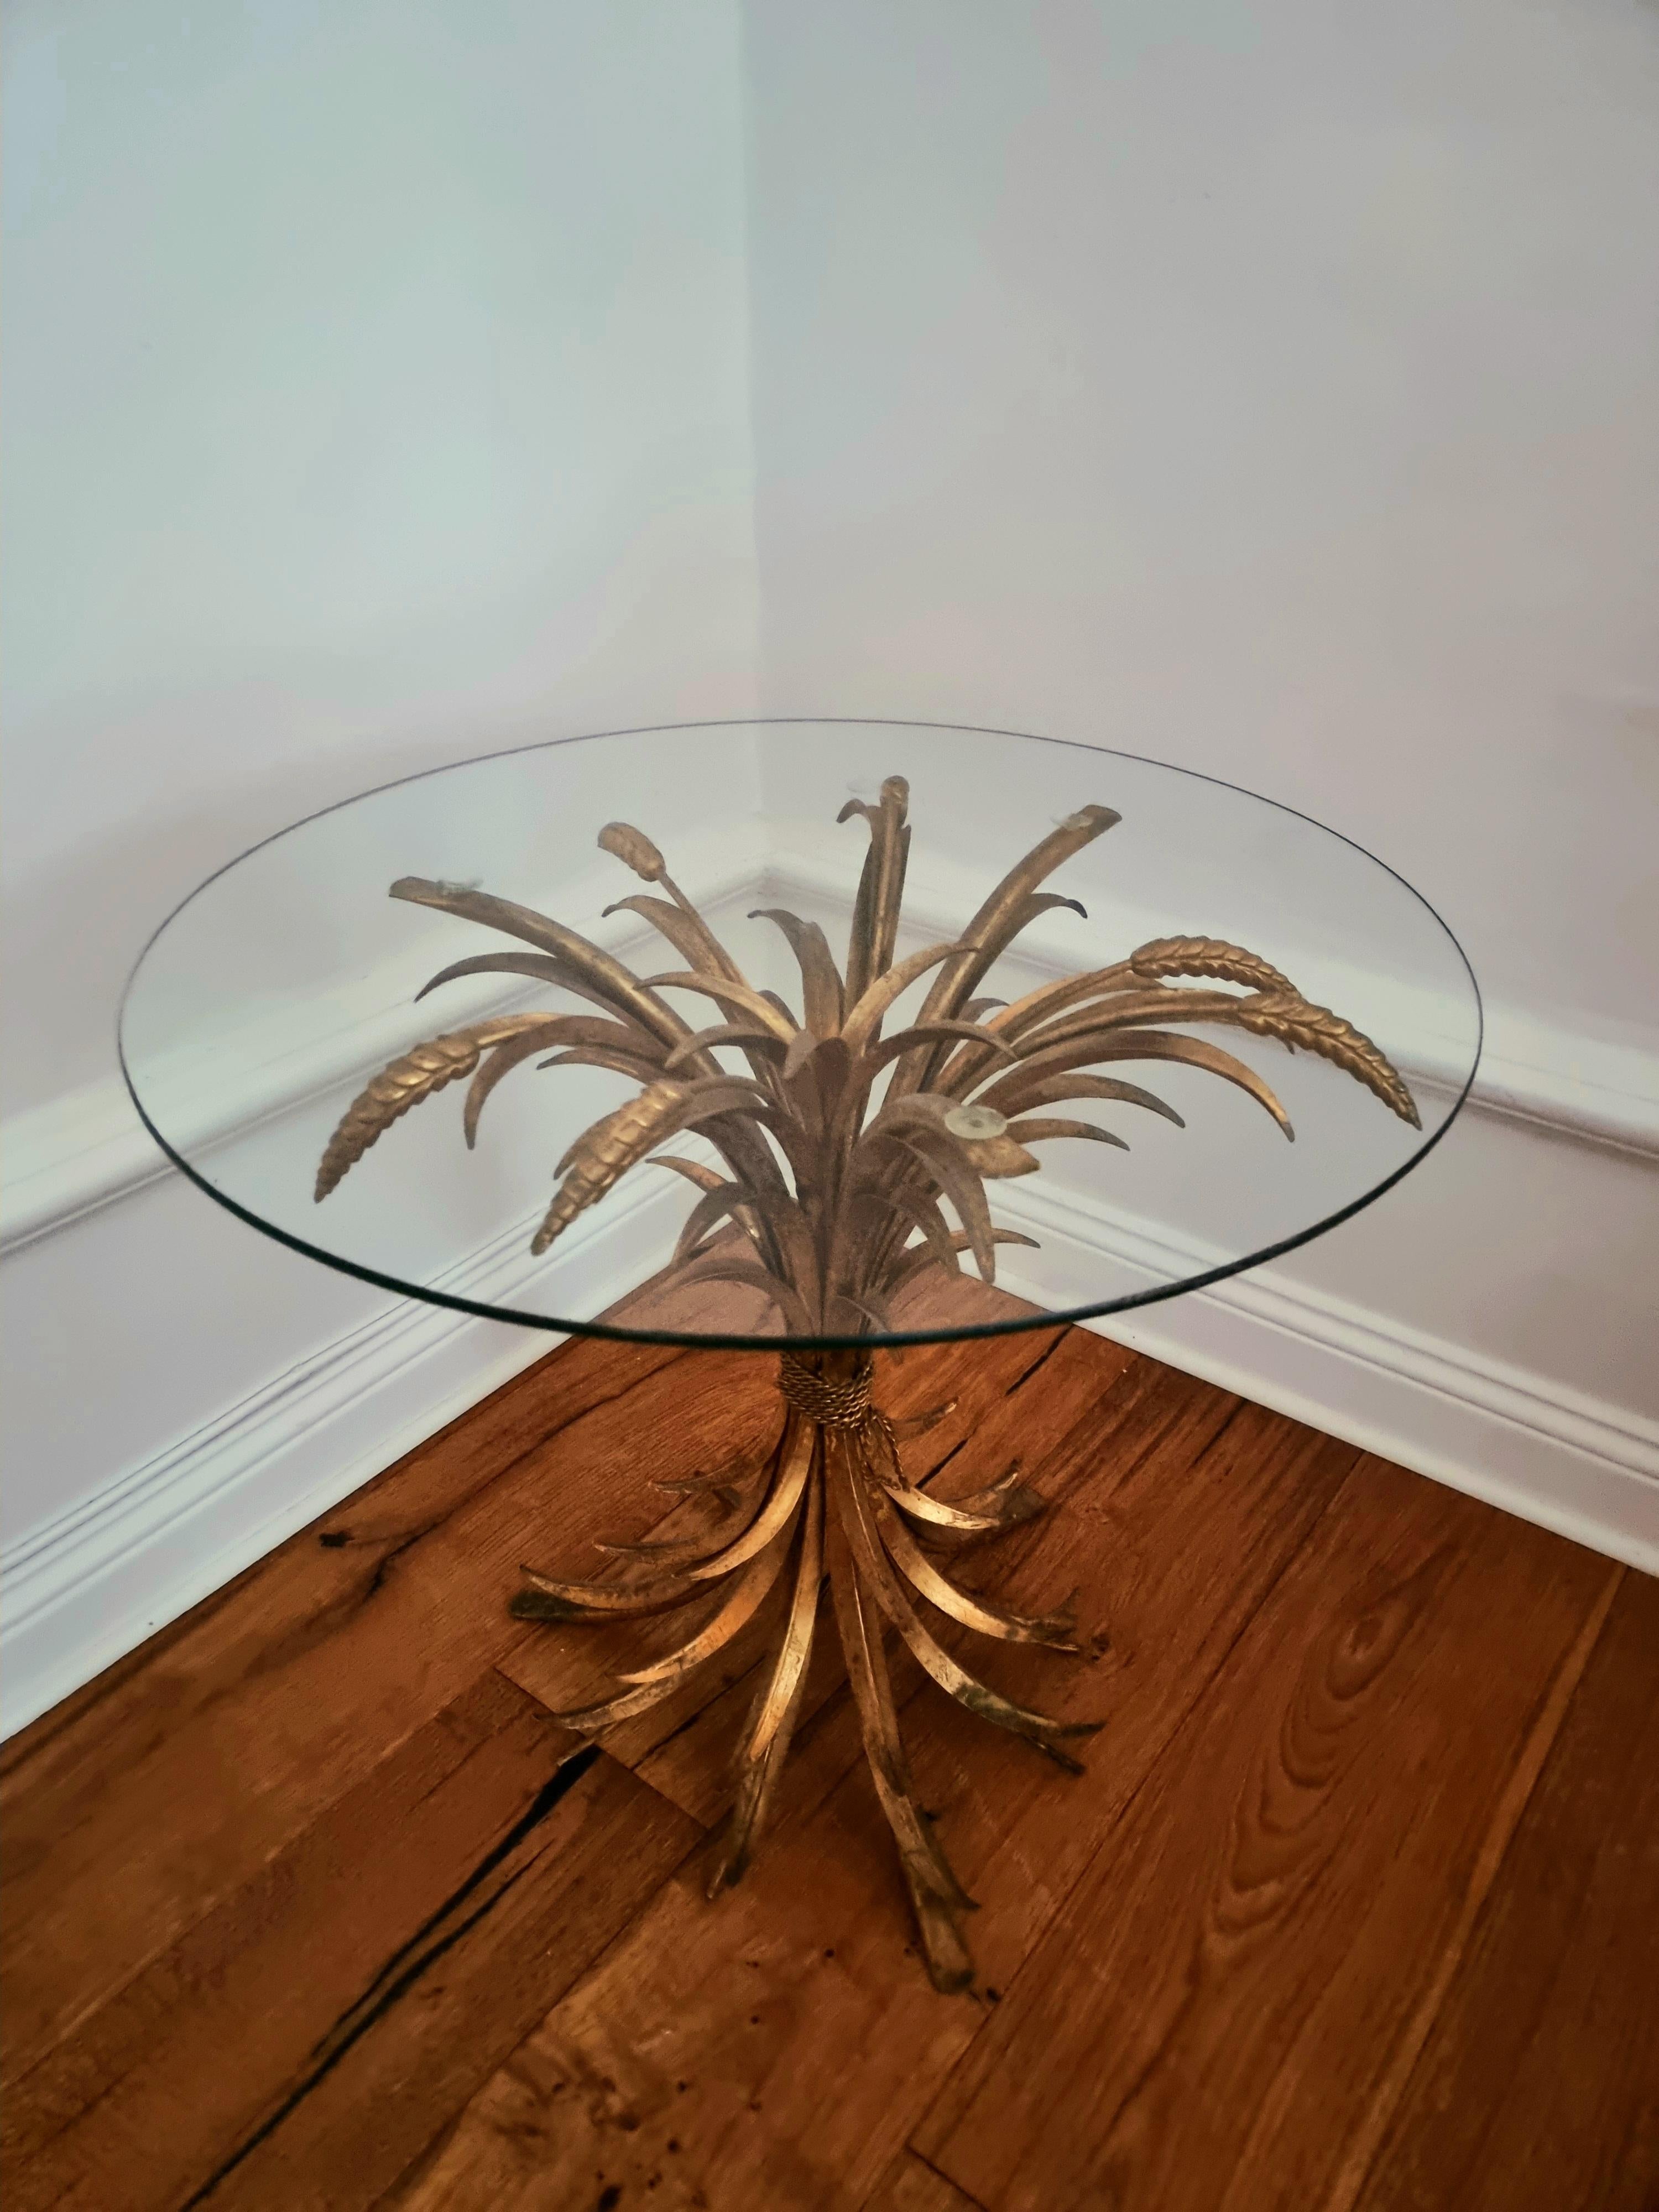 Hollywood Regency side table in gilt metal sheaf of wheat by Hans Kögl 1960/70s.

Coco Chanel had the larger model of this table in her home, therefore the model is called today: Coco Chanel table.

In good condition, normal patina/ signs of age and